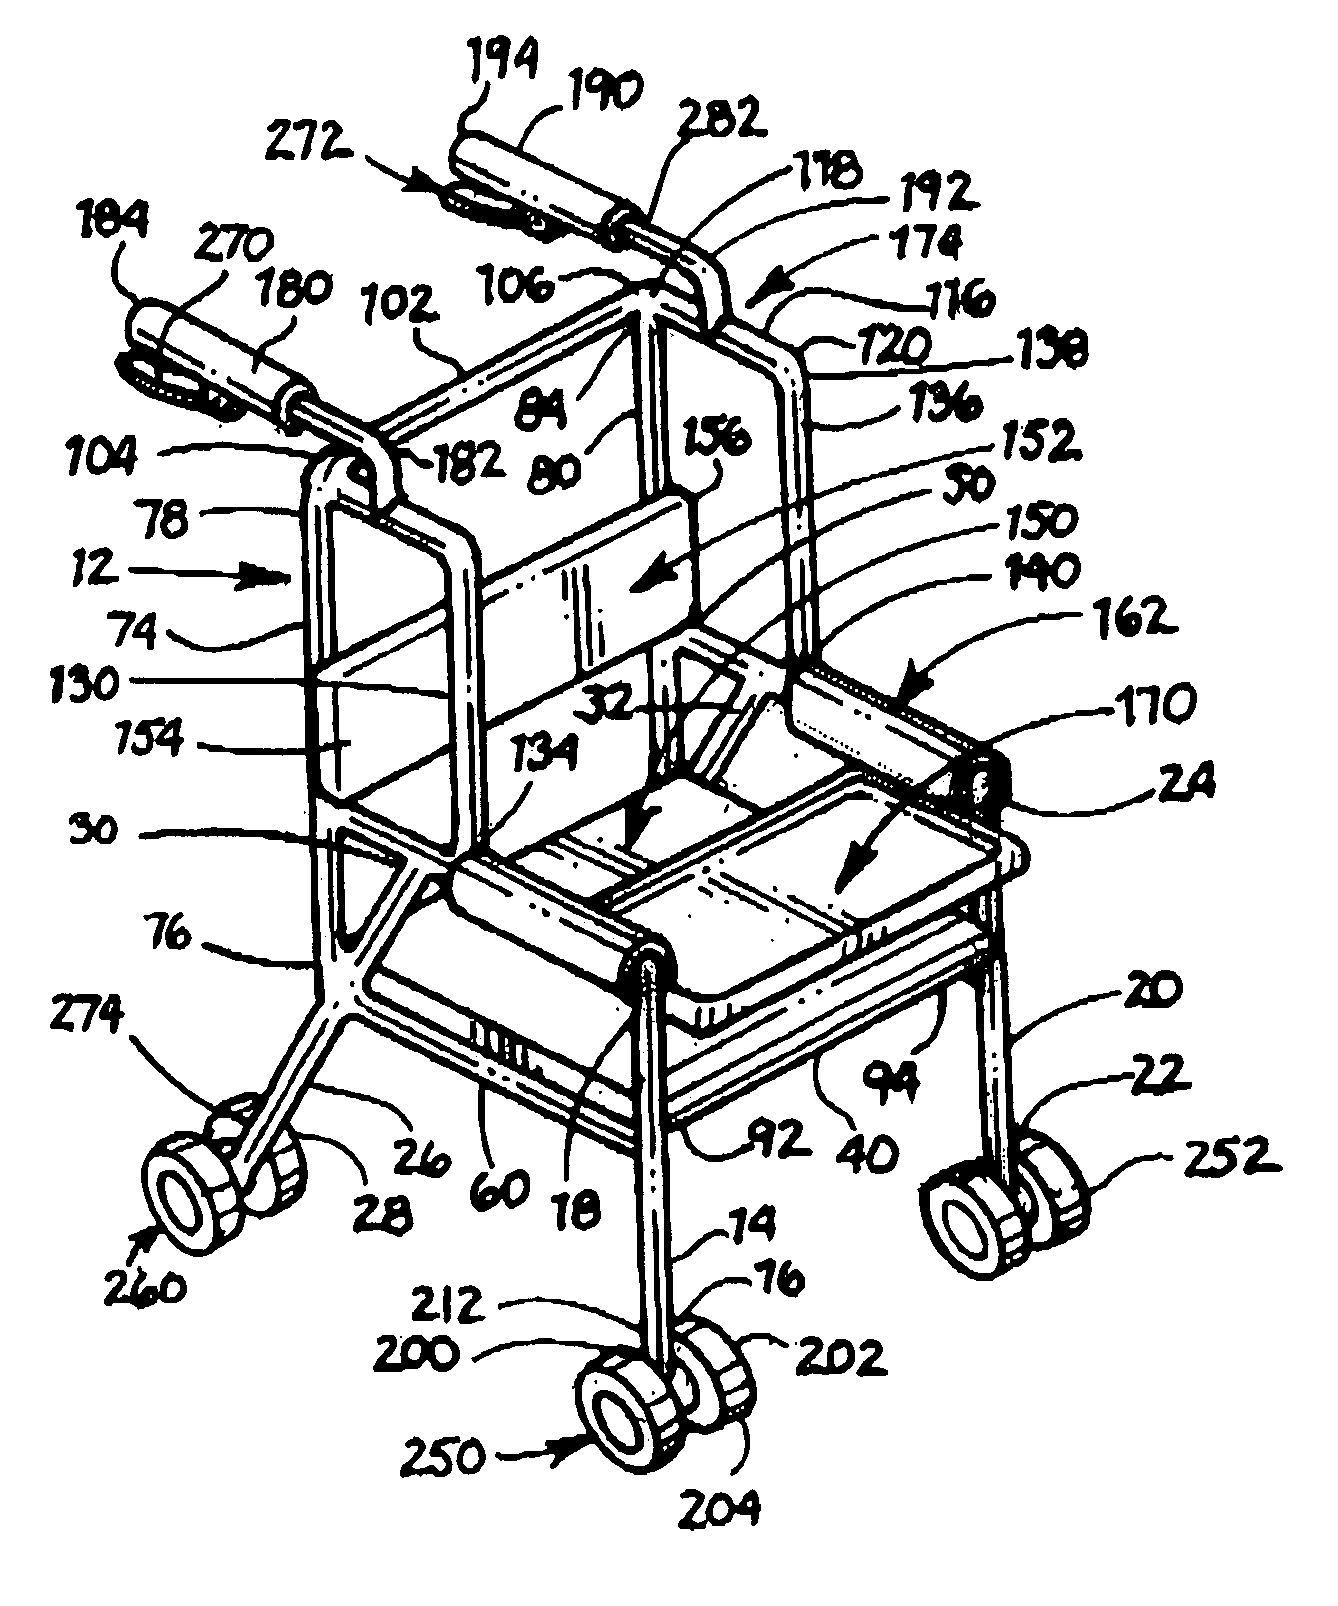 Combined wheelchair, walker, and sitting chair